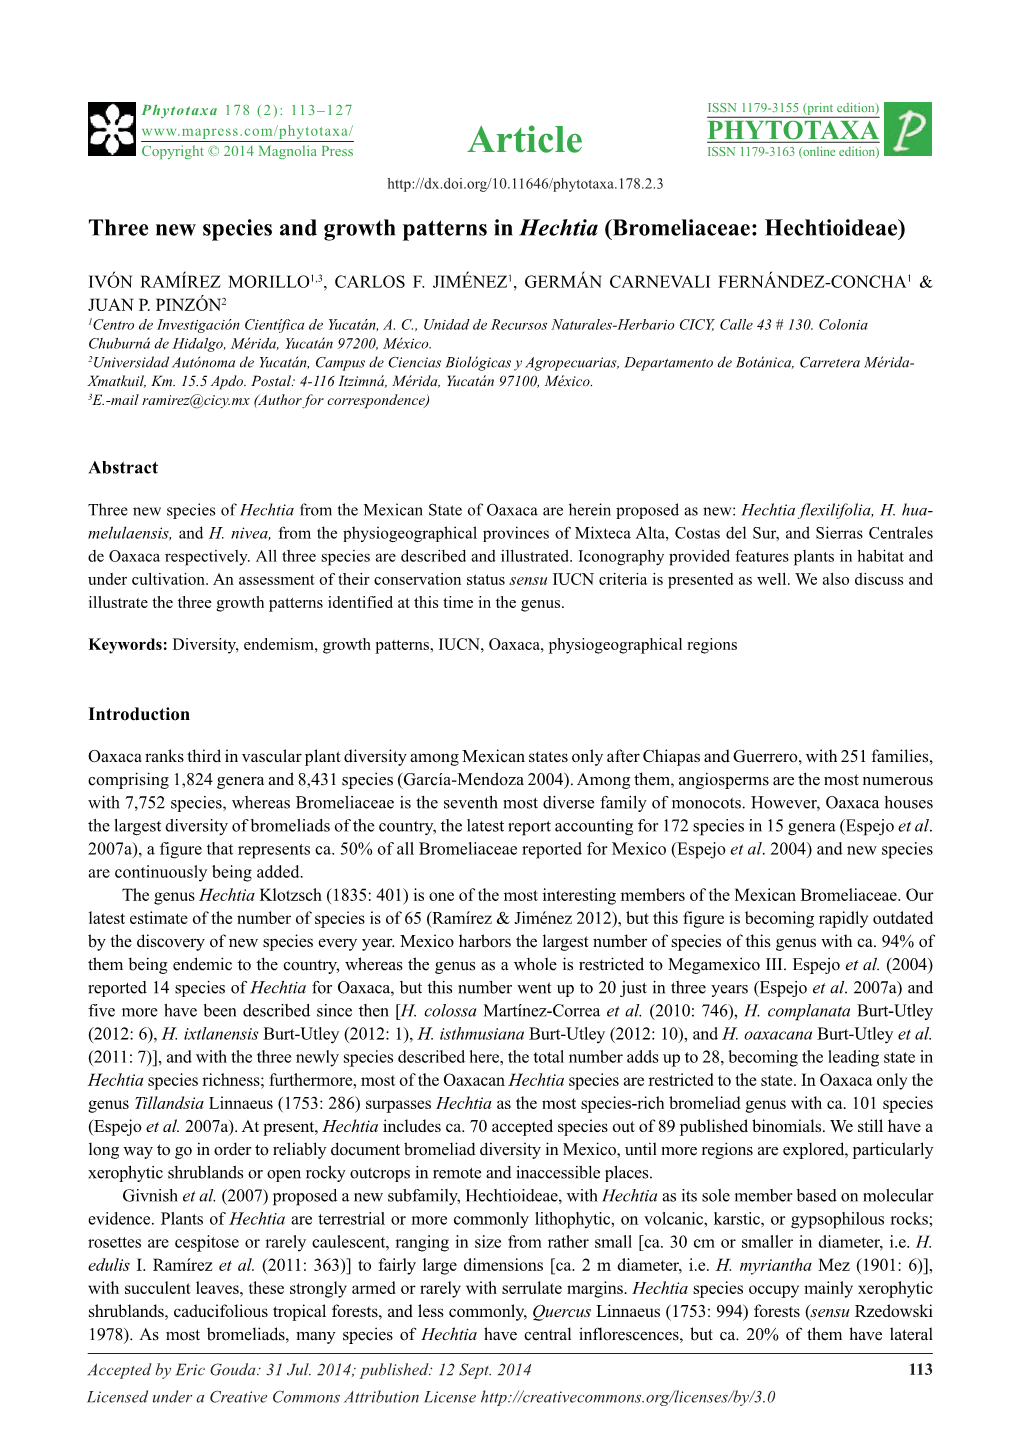 Three New Species and Growth Patterns in Hechtia (Bromeliaceae: Hechtioideae)